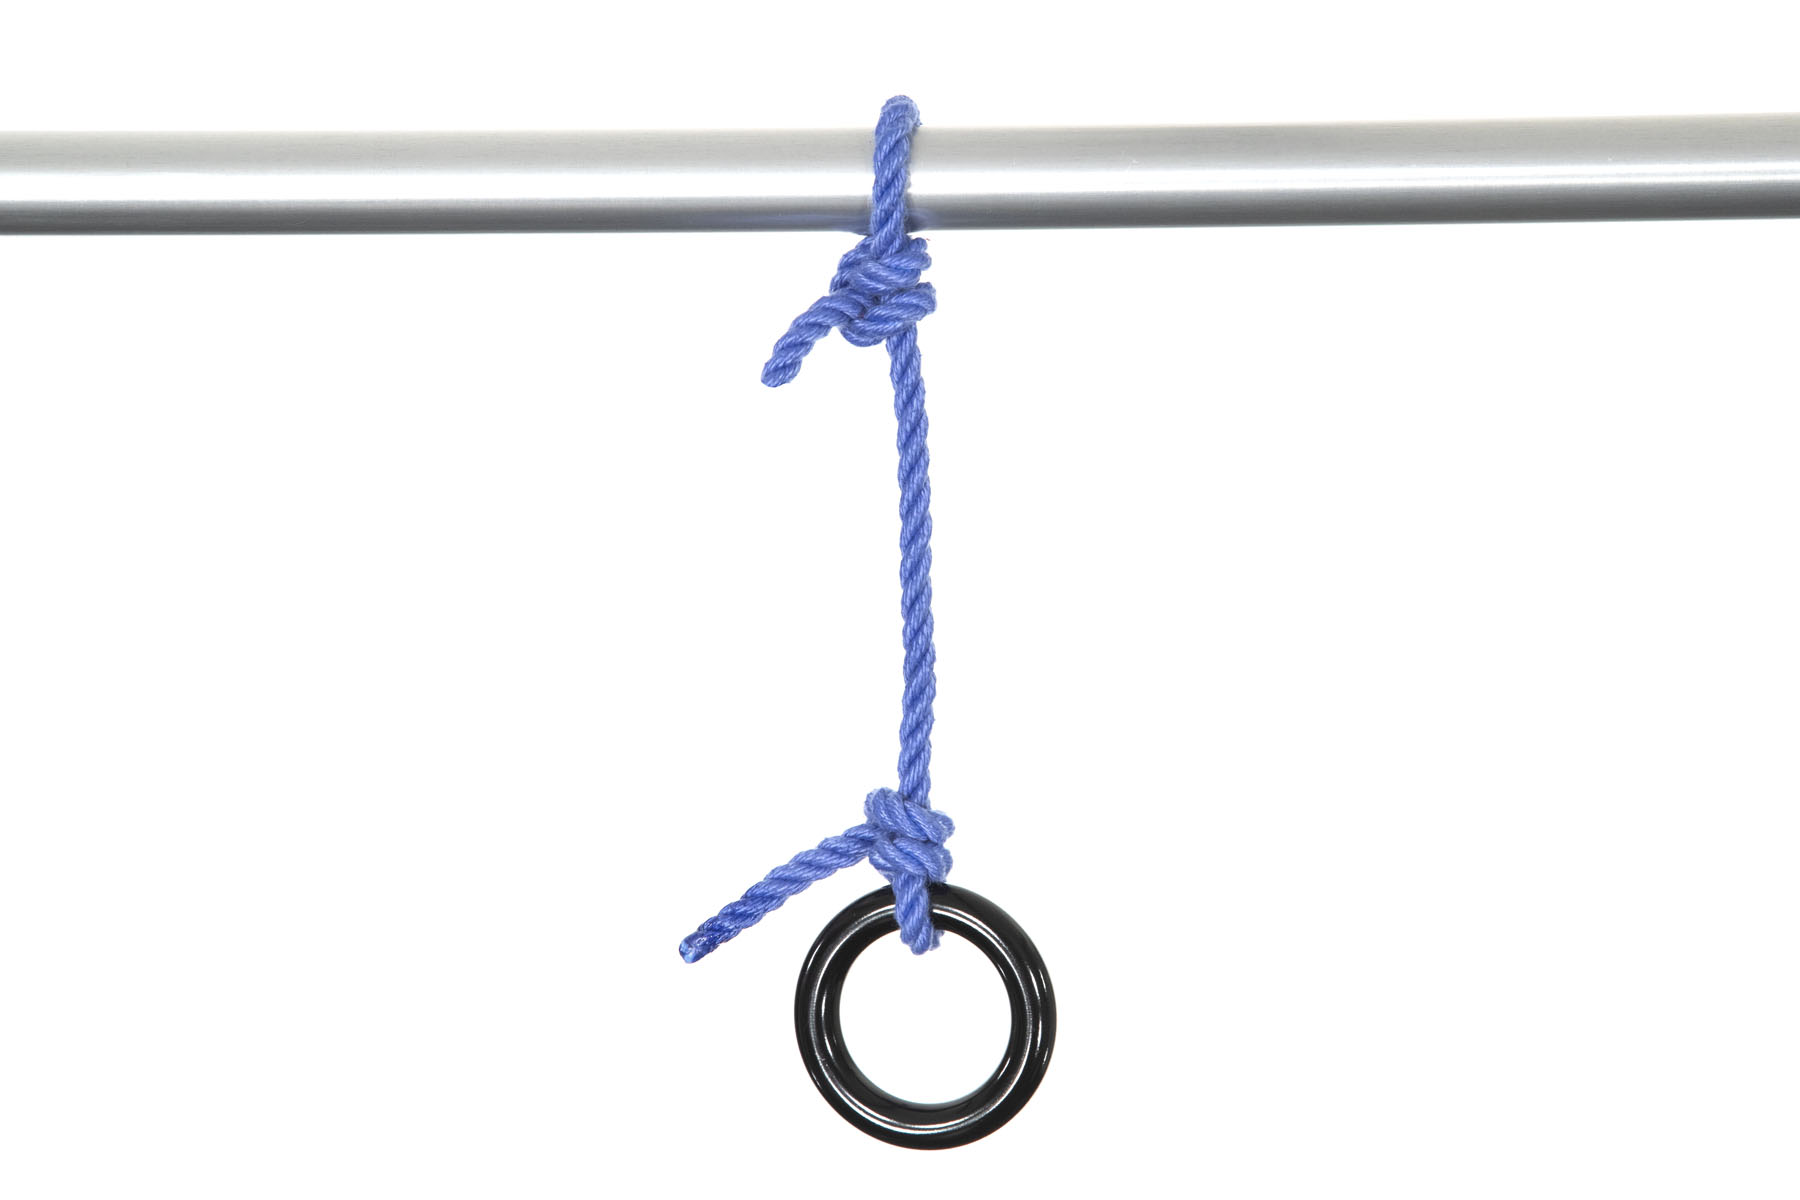 A length of one inch diameter aluminum pipe crosses the frame horizontally. A blue rope is tied to the pipe with two half hitches. Six inches away, the other end of the rope is tied to a rappel ring with two half hitches. The rappel ring is made of shiny black metal and is about two and half inches in diameter. The metal that makes up the ring is about half an inch in diameter.